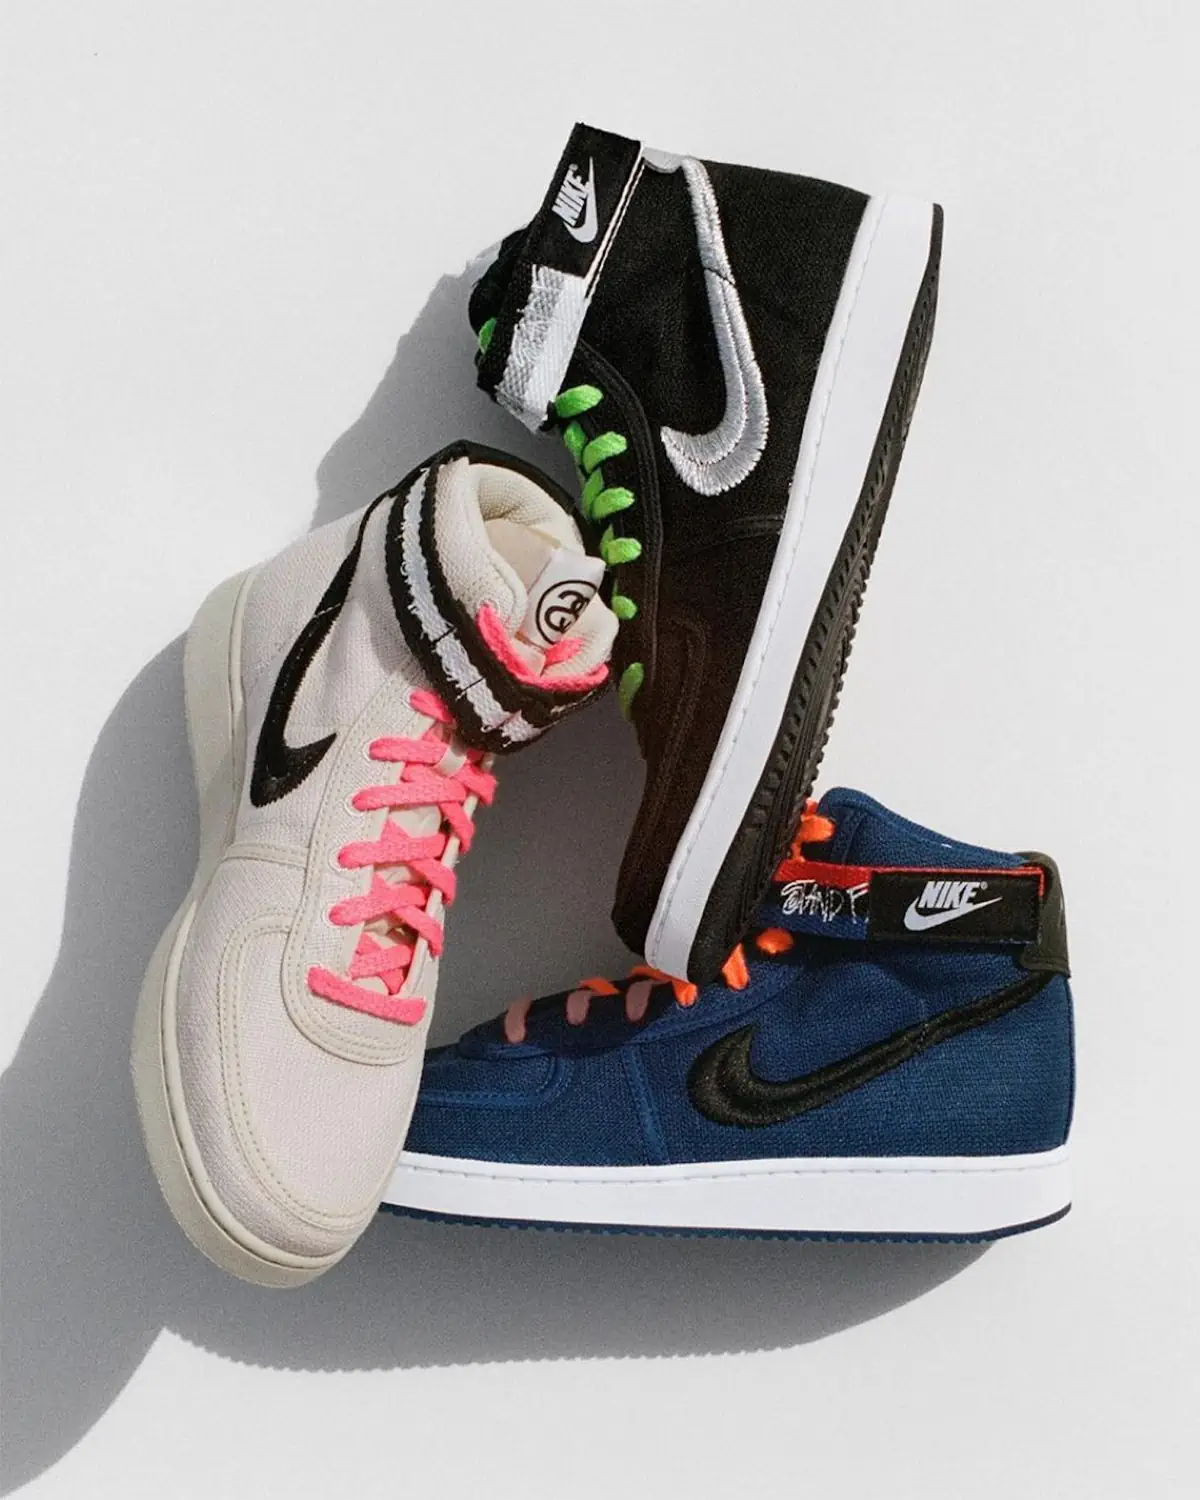 Stussy x Nike Vandal High, a new addition to an iconic collaboration